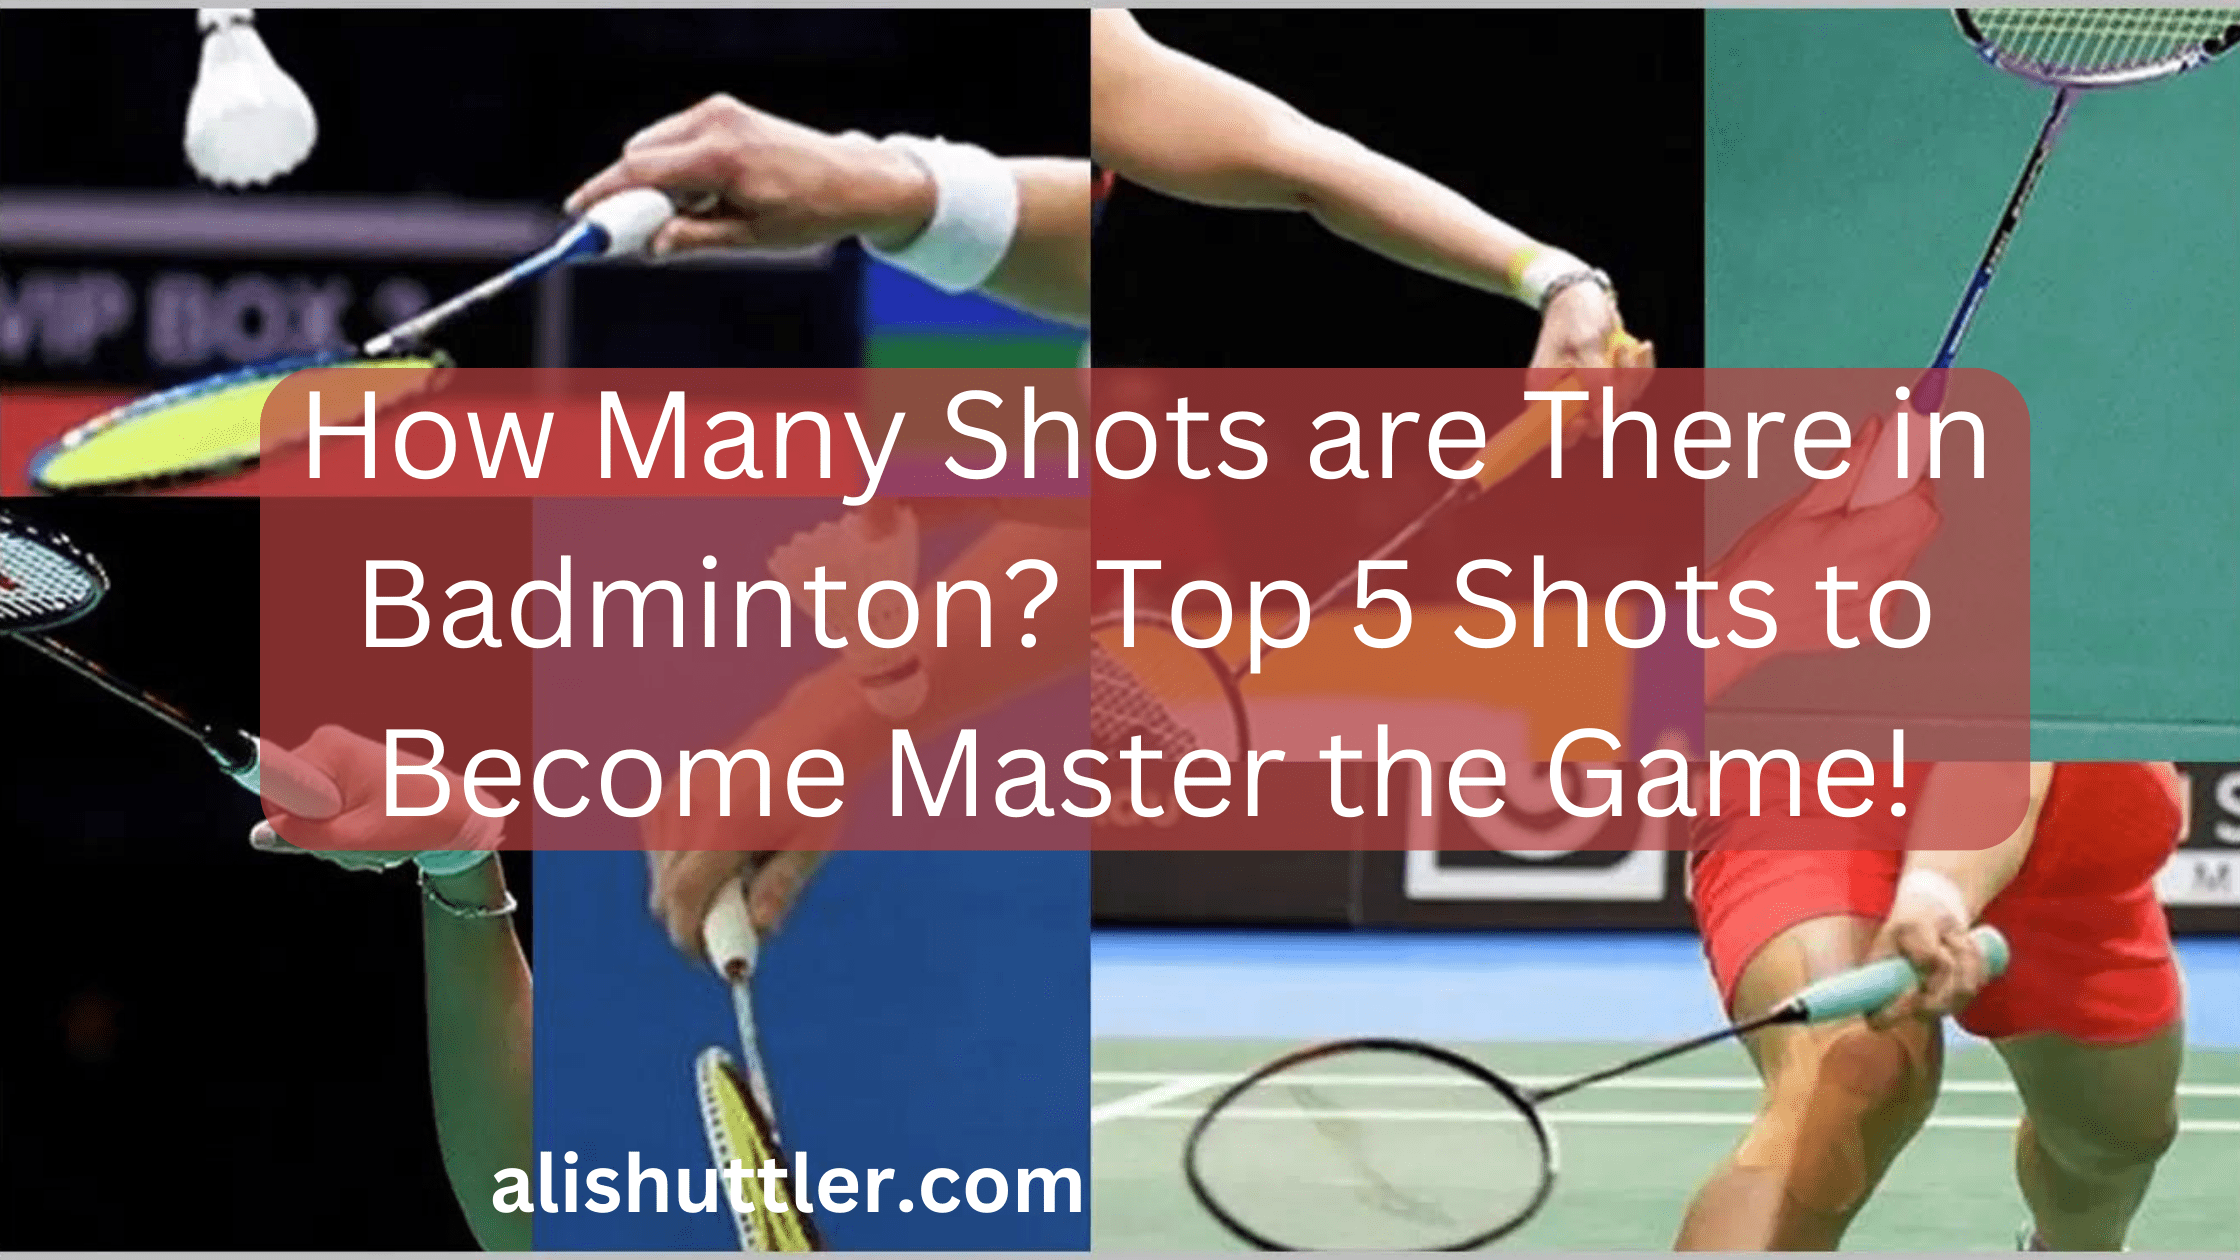 How Many Shots are There in Badminton? Top 5 Shots